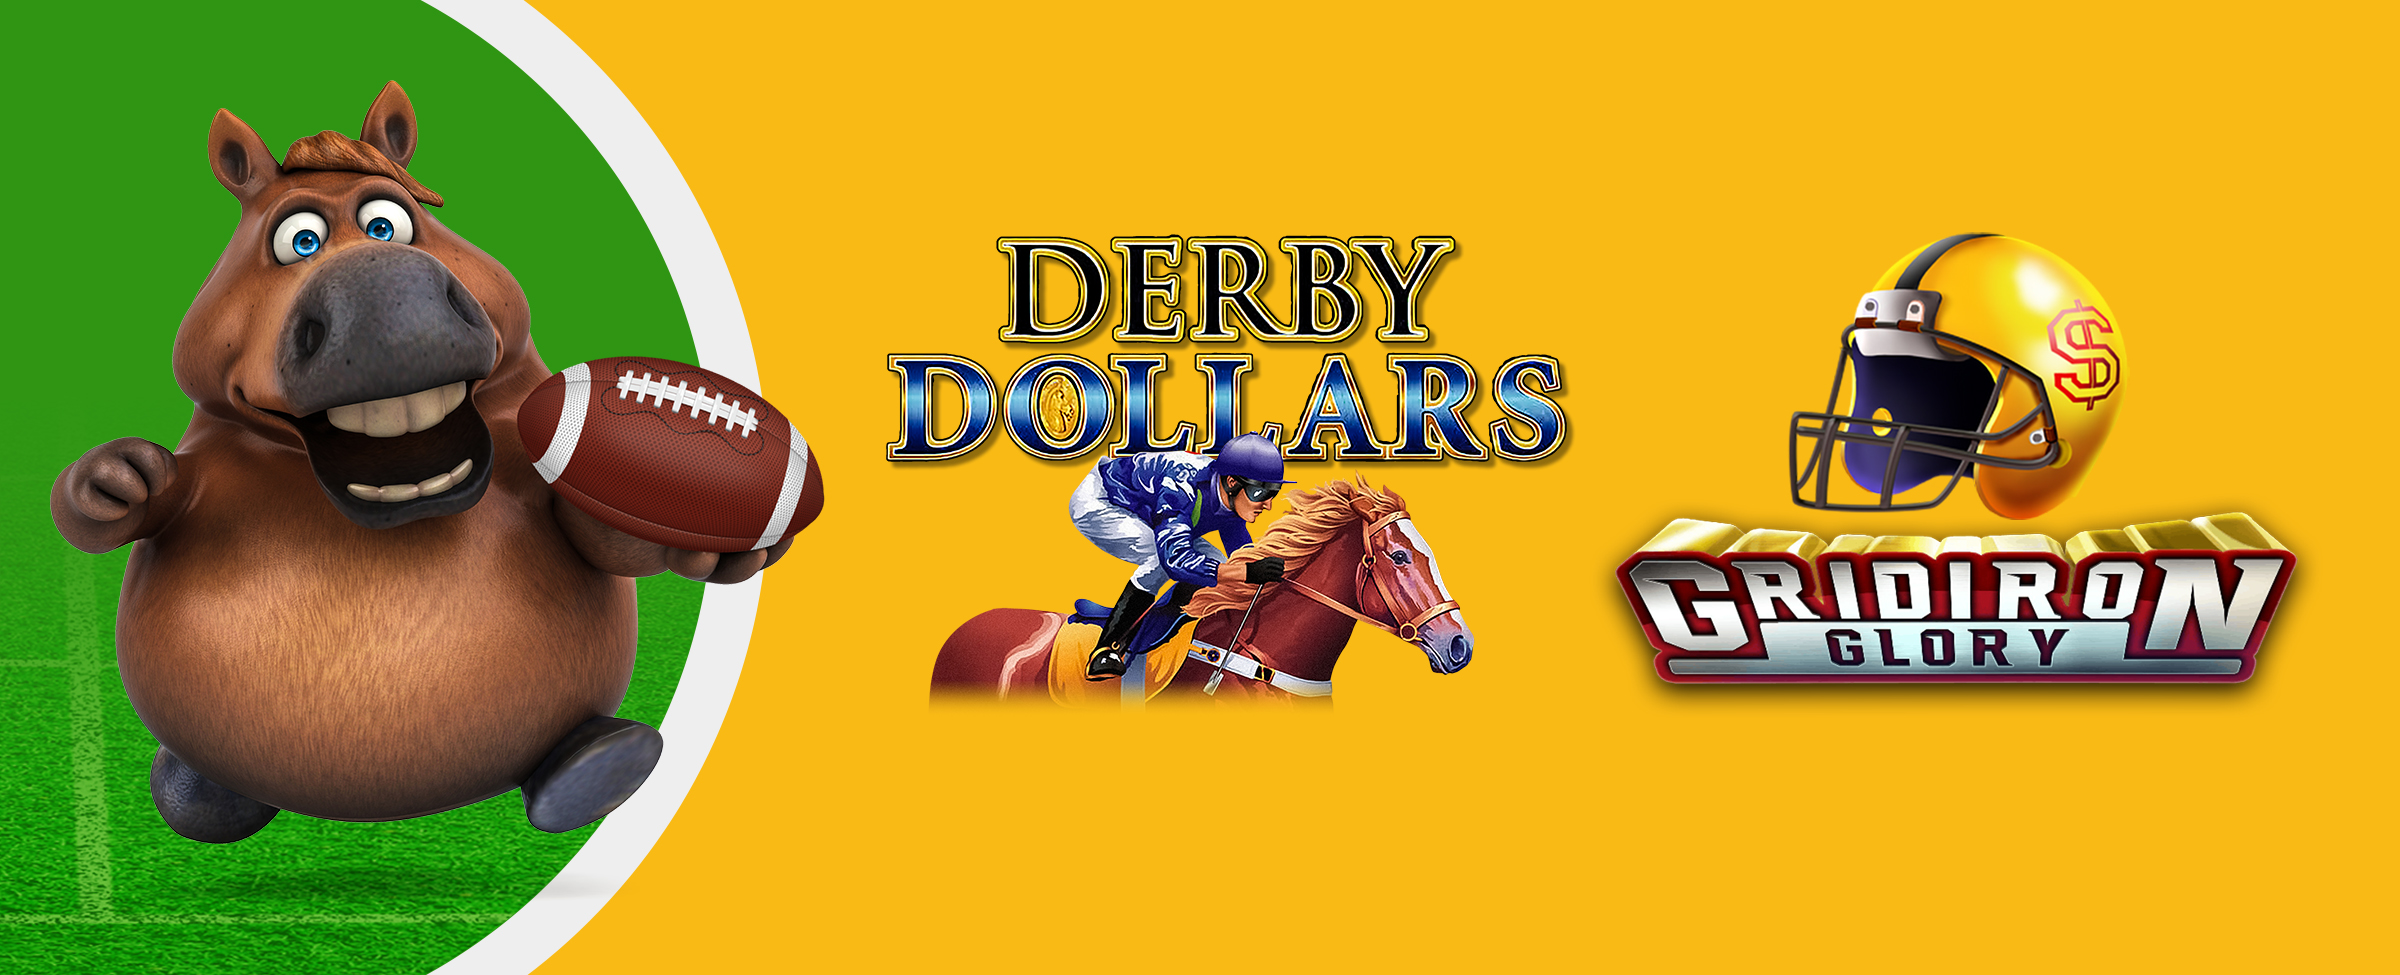 Do I hear Derby Dollars? Perhaps Gridiron Glory? Your pick, but be sure to pick one or be left behind in the dust!